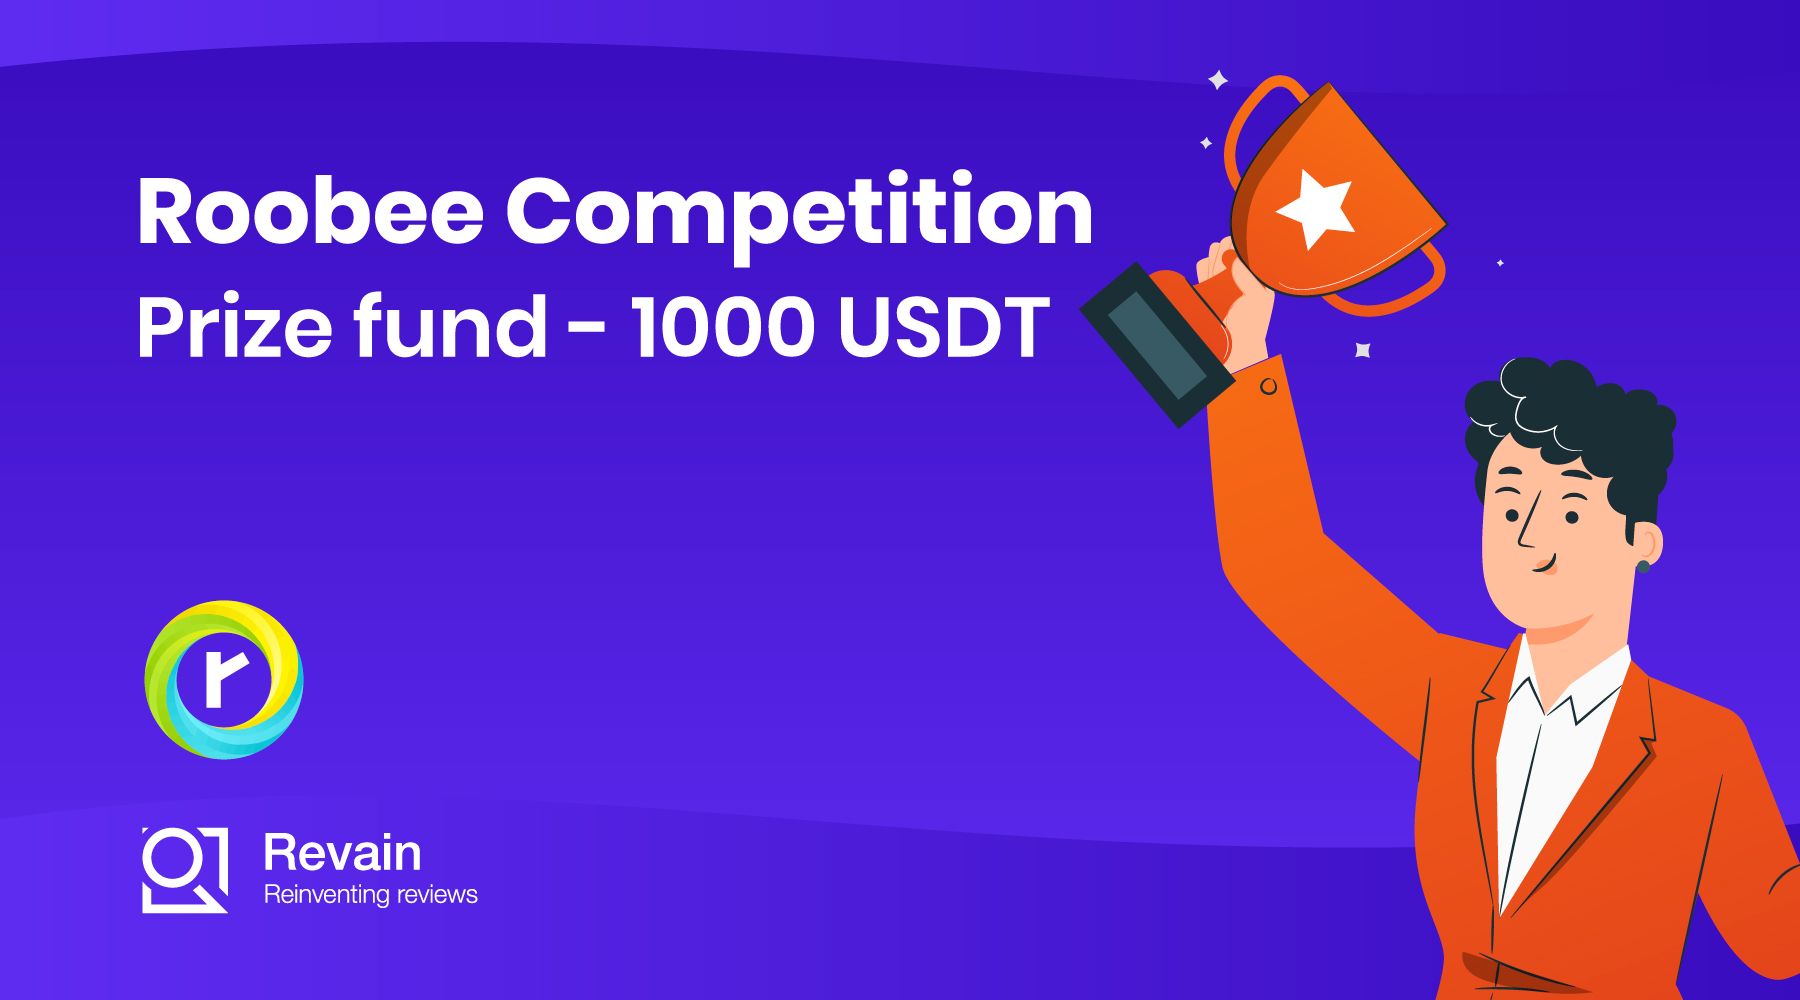 Article Roobee competition. Prize fund 1000!